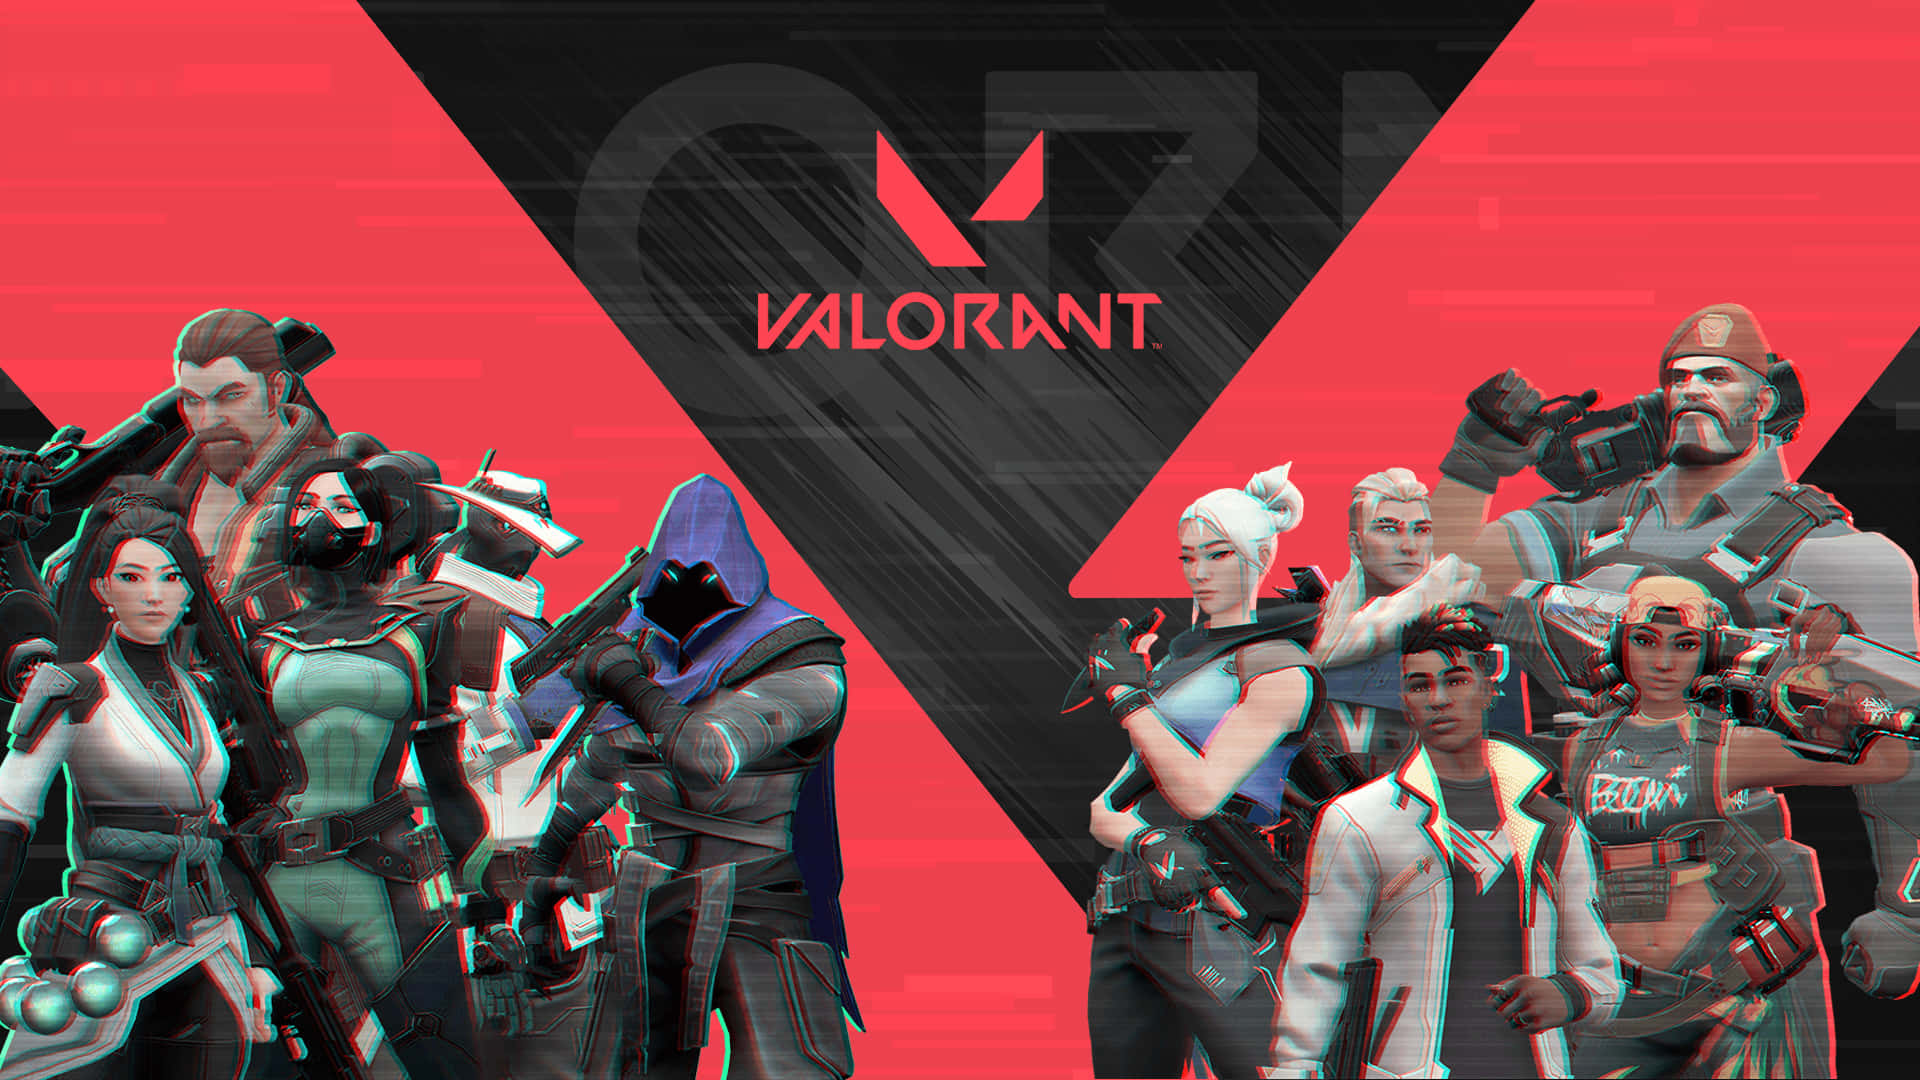 A professionally-trained agent prepares to take their place in Valorant. Wallpaper